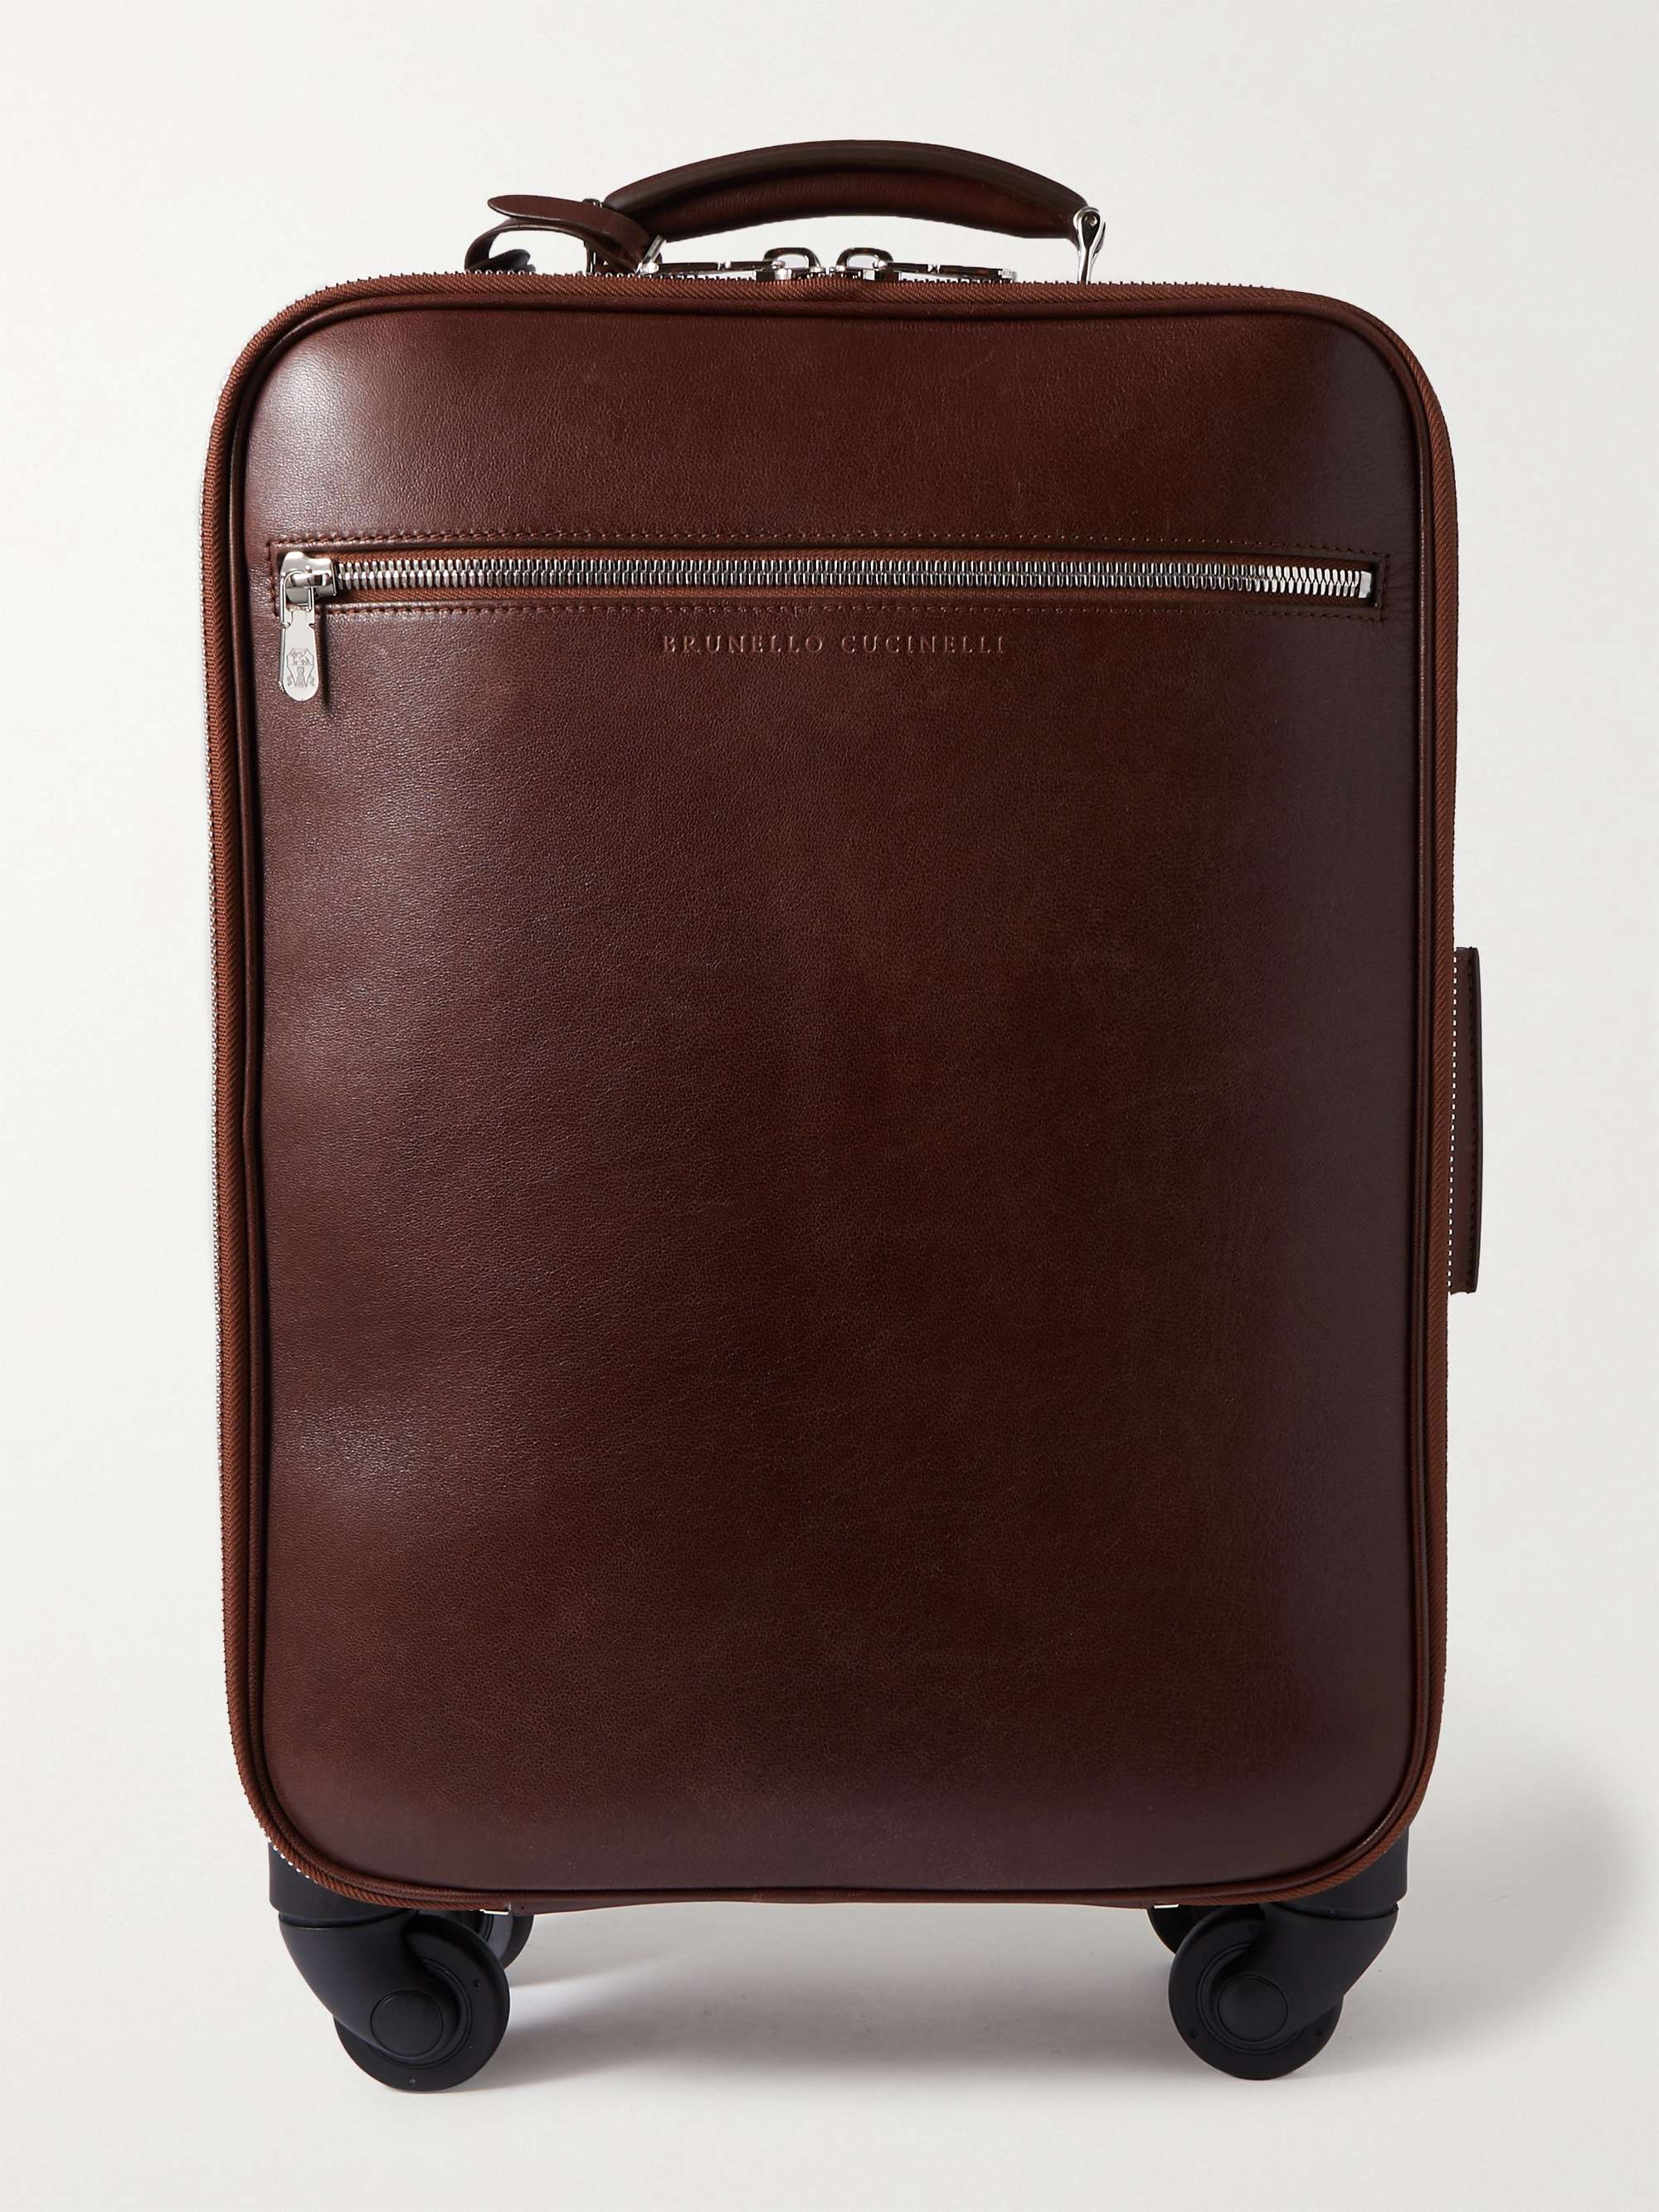 Brown Leather Carry On Suitcase, Brown Leather Suitcase